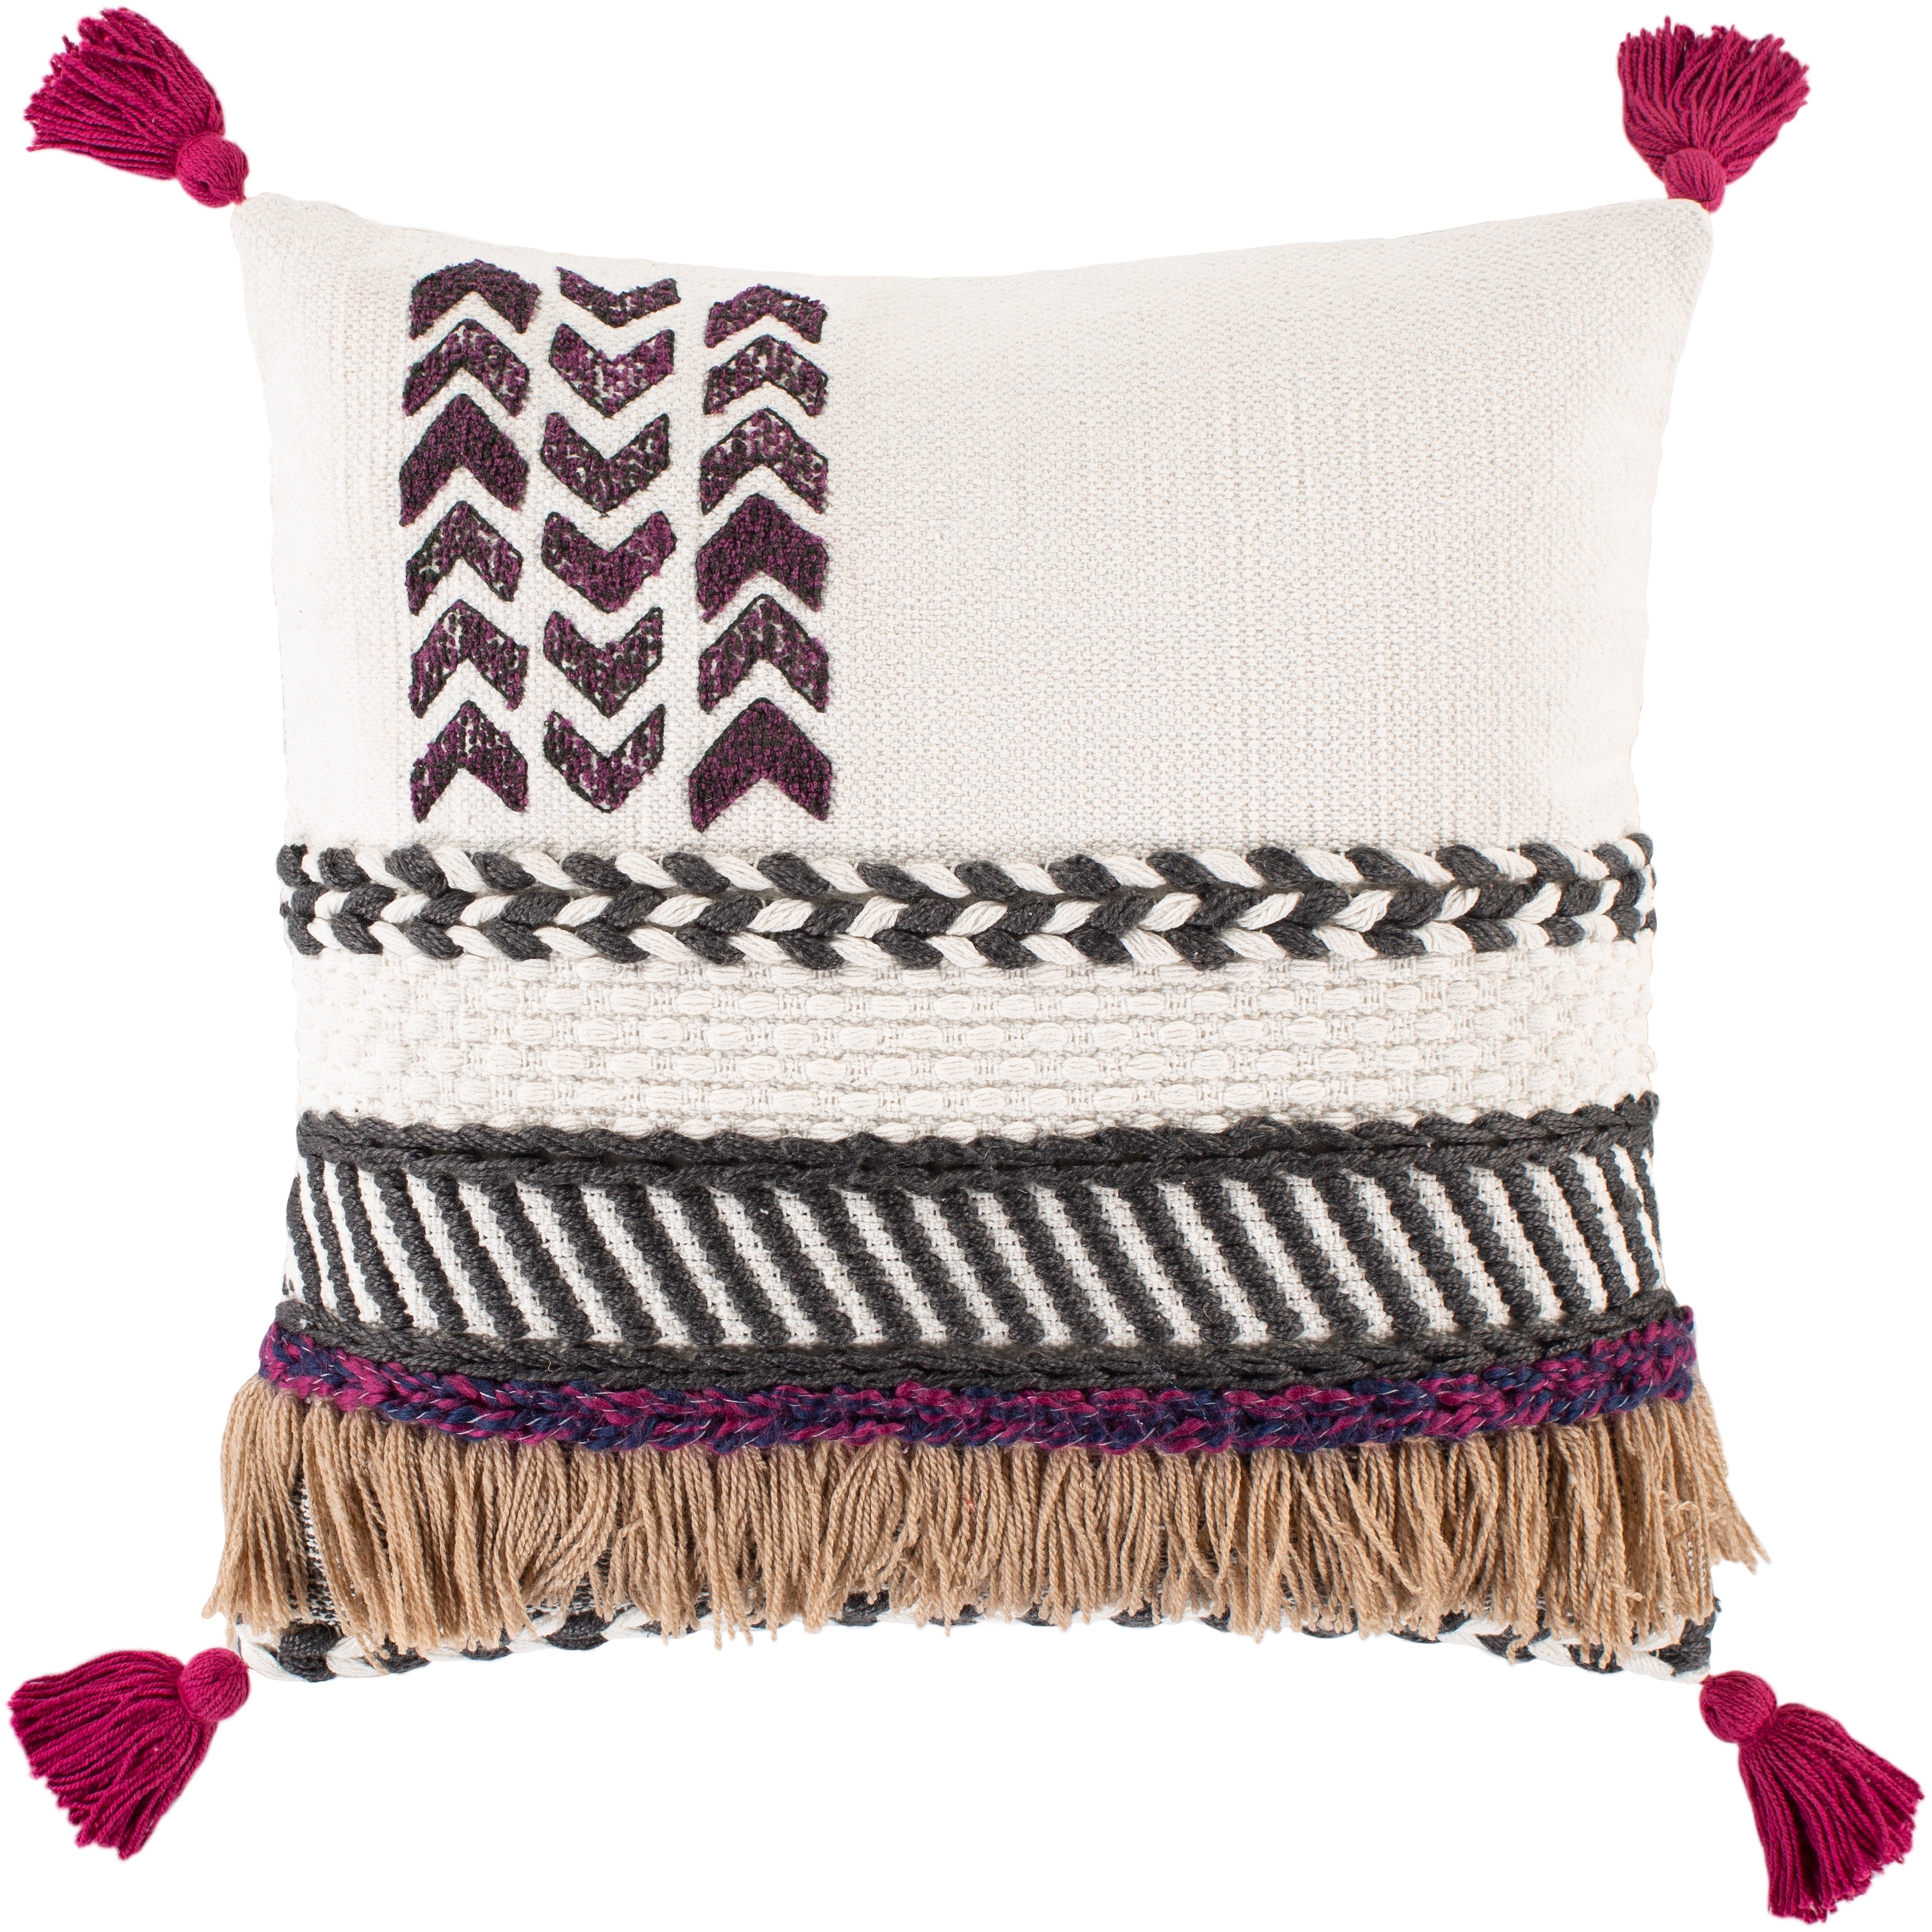 https://ak1.ostkcdn.com/images/products/is/images/direct/ed4e4e819f08e579608ff154efd11a6fc6239ea9/Vernita-Embroidered-Textured-Tassel-Throw-Pillow.jpg